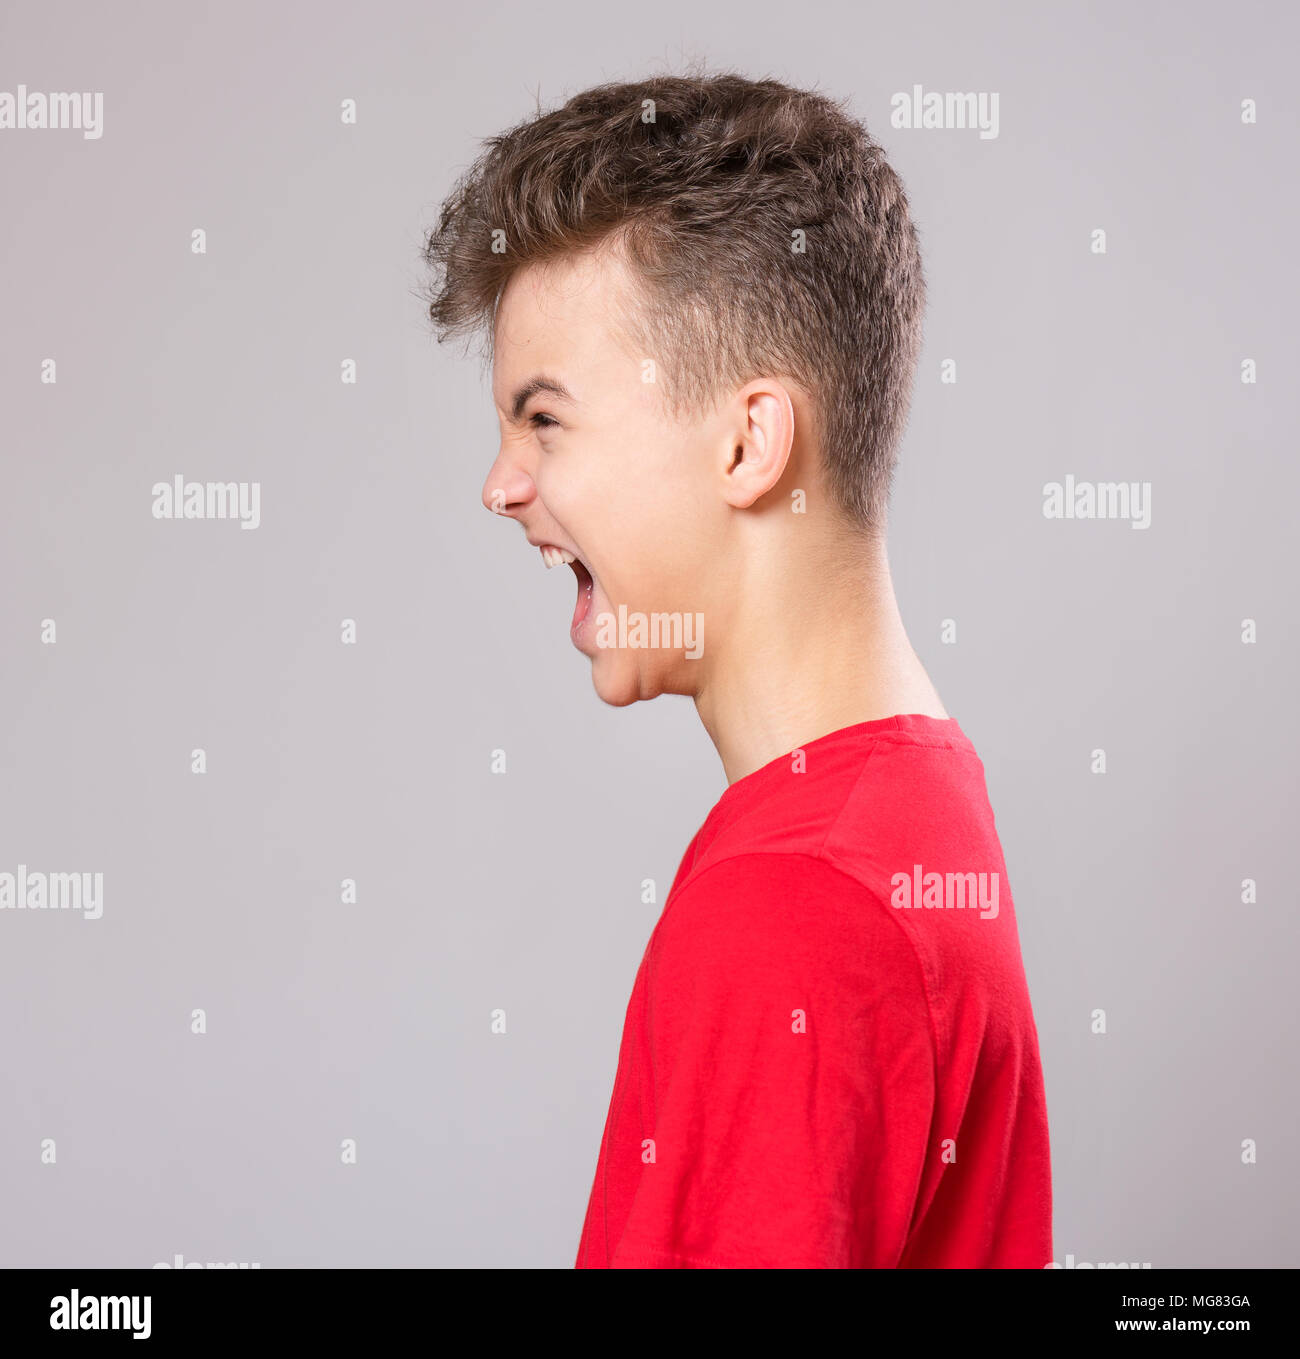 Emotional portrait of profile irritated shouting teen boy. Furious teenager screaming and looking away. Handsome outraged child shouting out loud on g Stock Photo